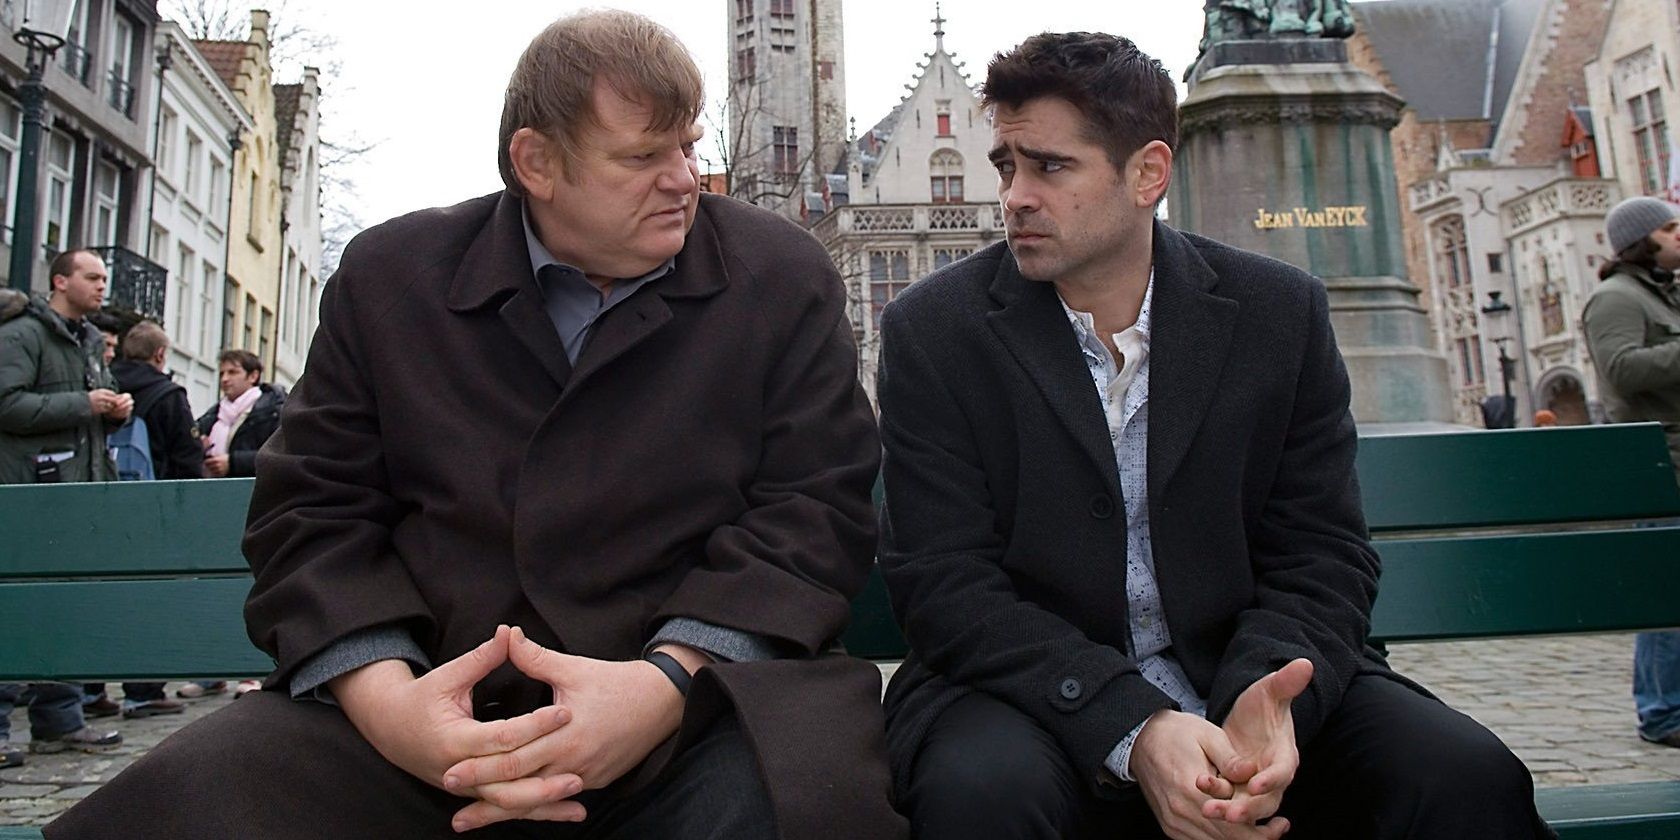 In Bruges Rays 5 Best Quotes (& Kens 5 Best)